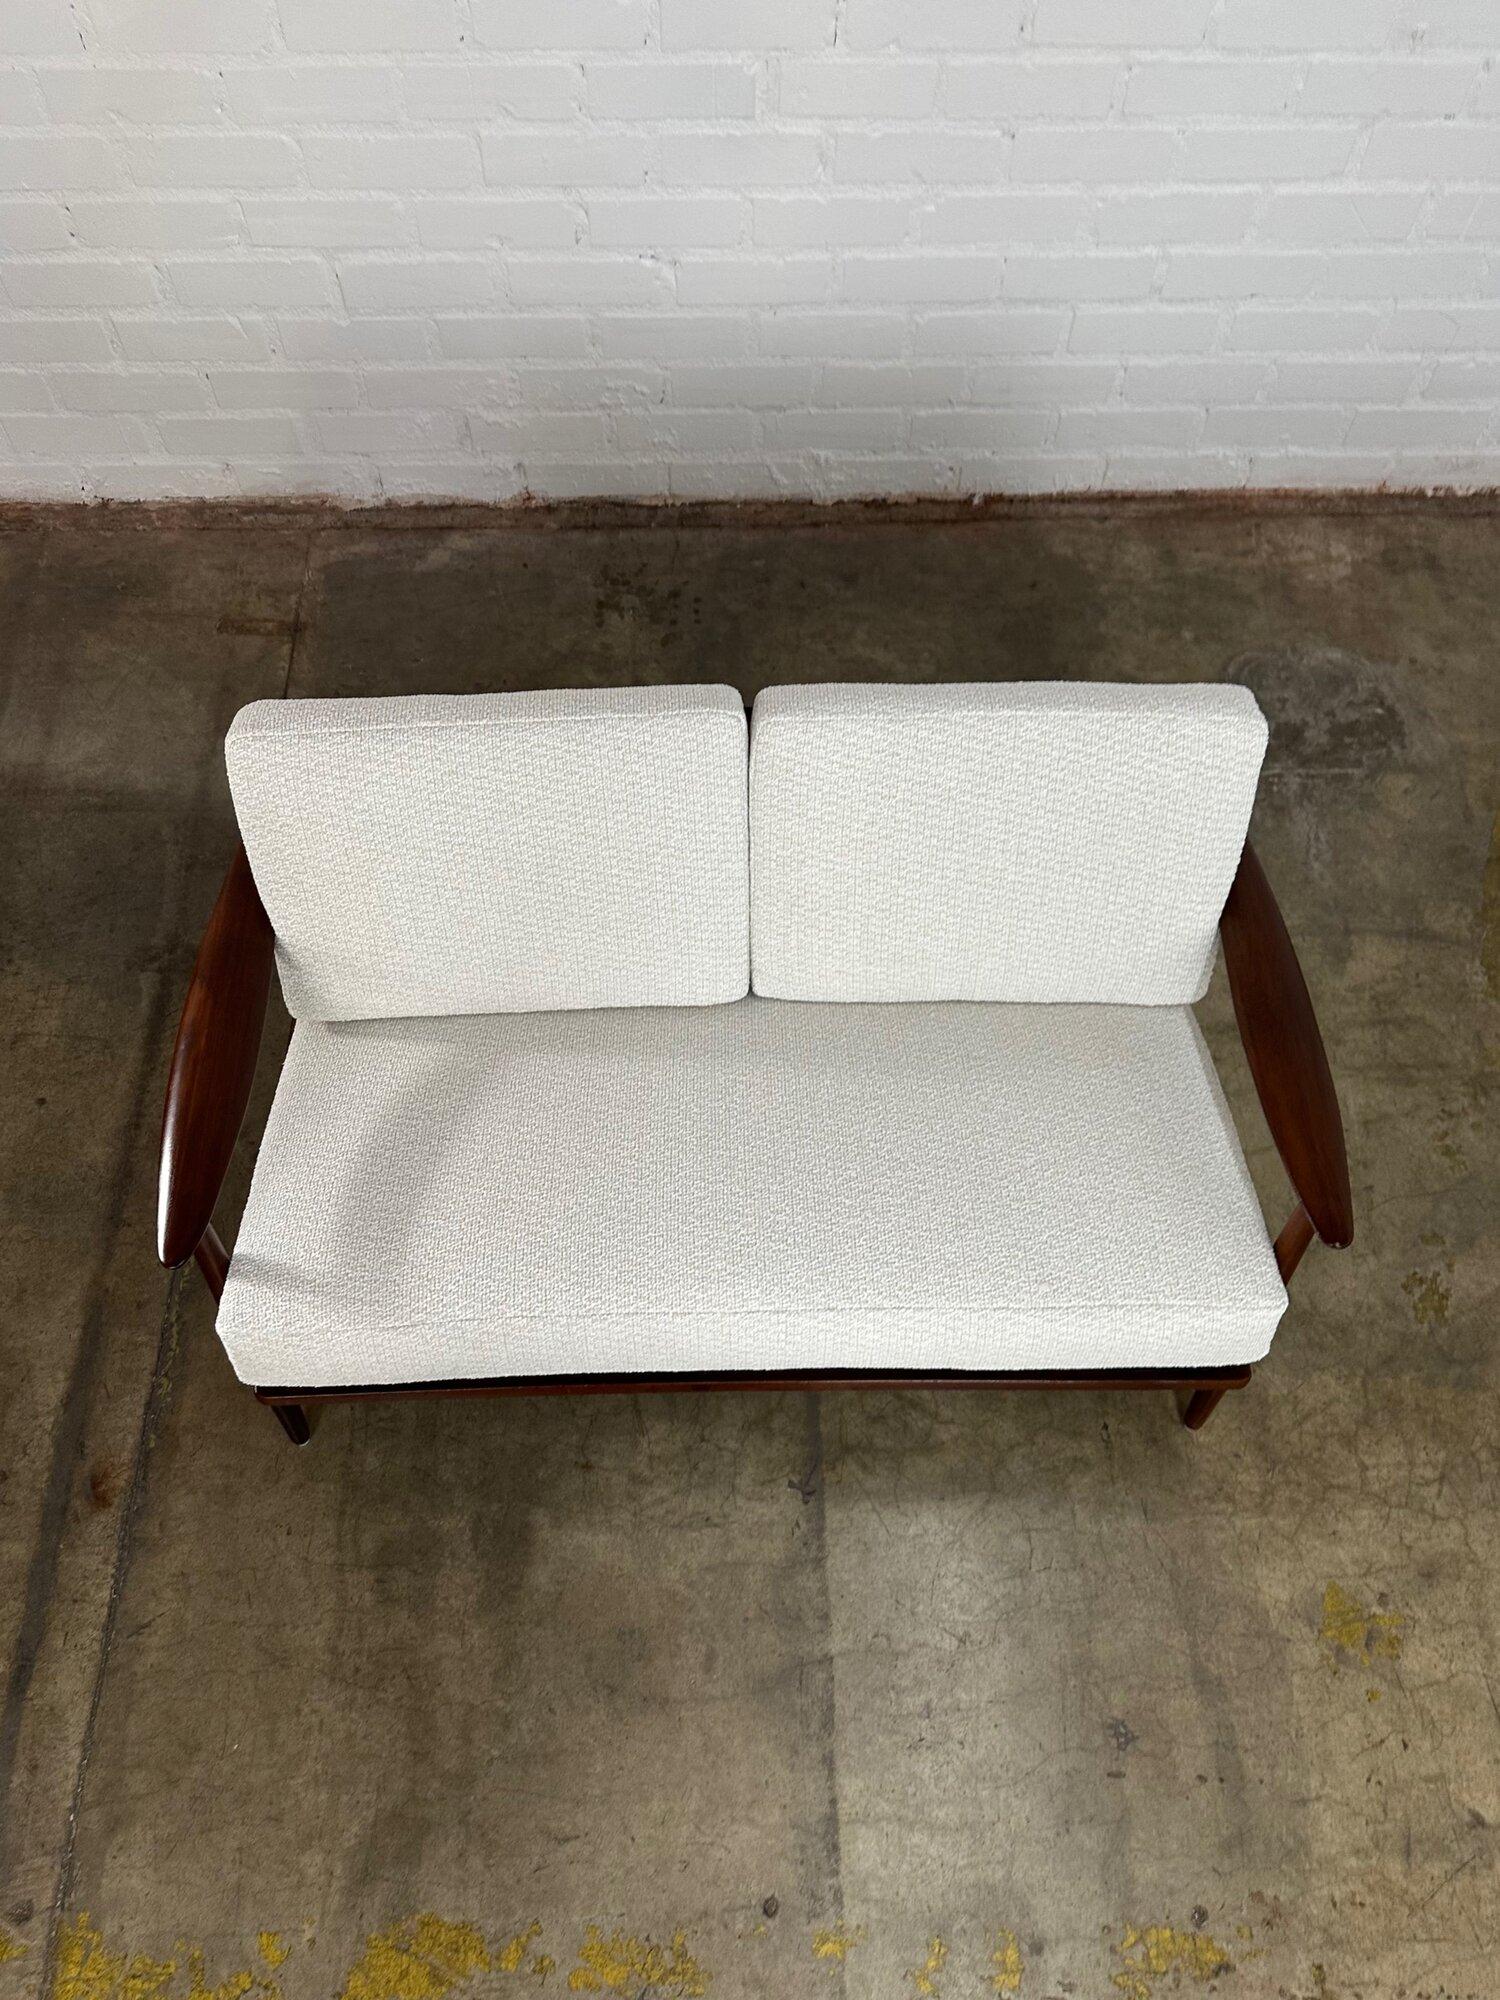 Midcentury Danish Modern Loveseat In Good Condition For Sale In Los Angeles, CA